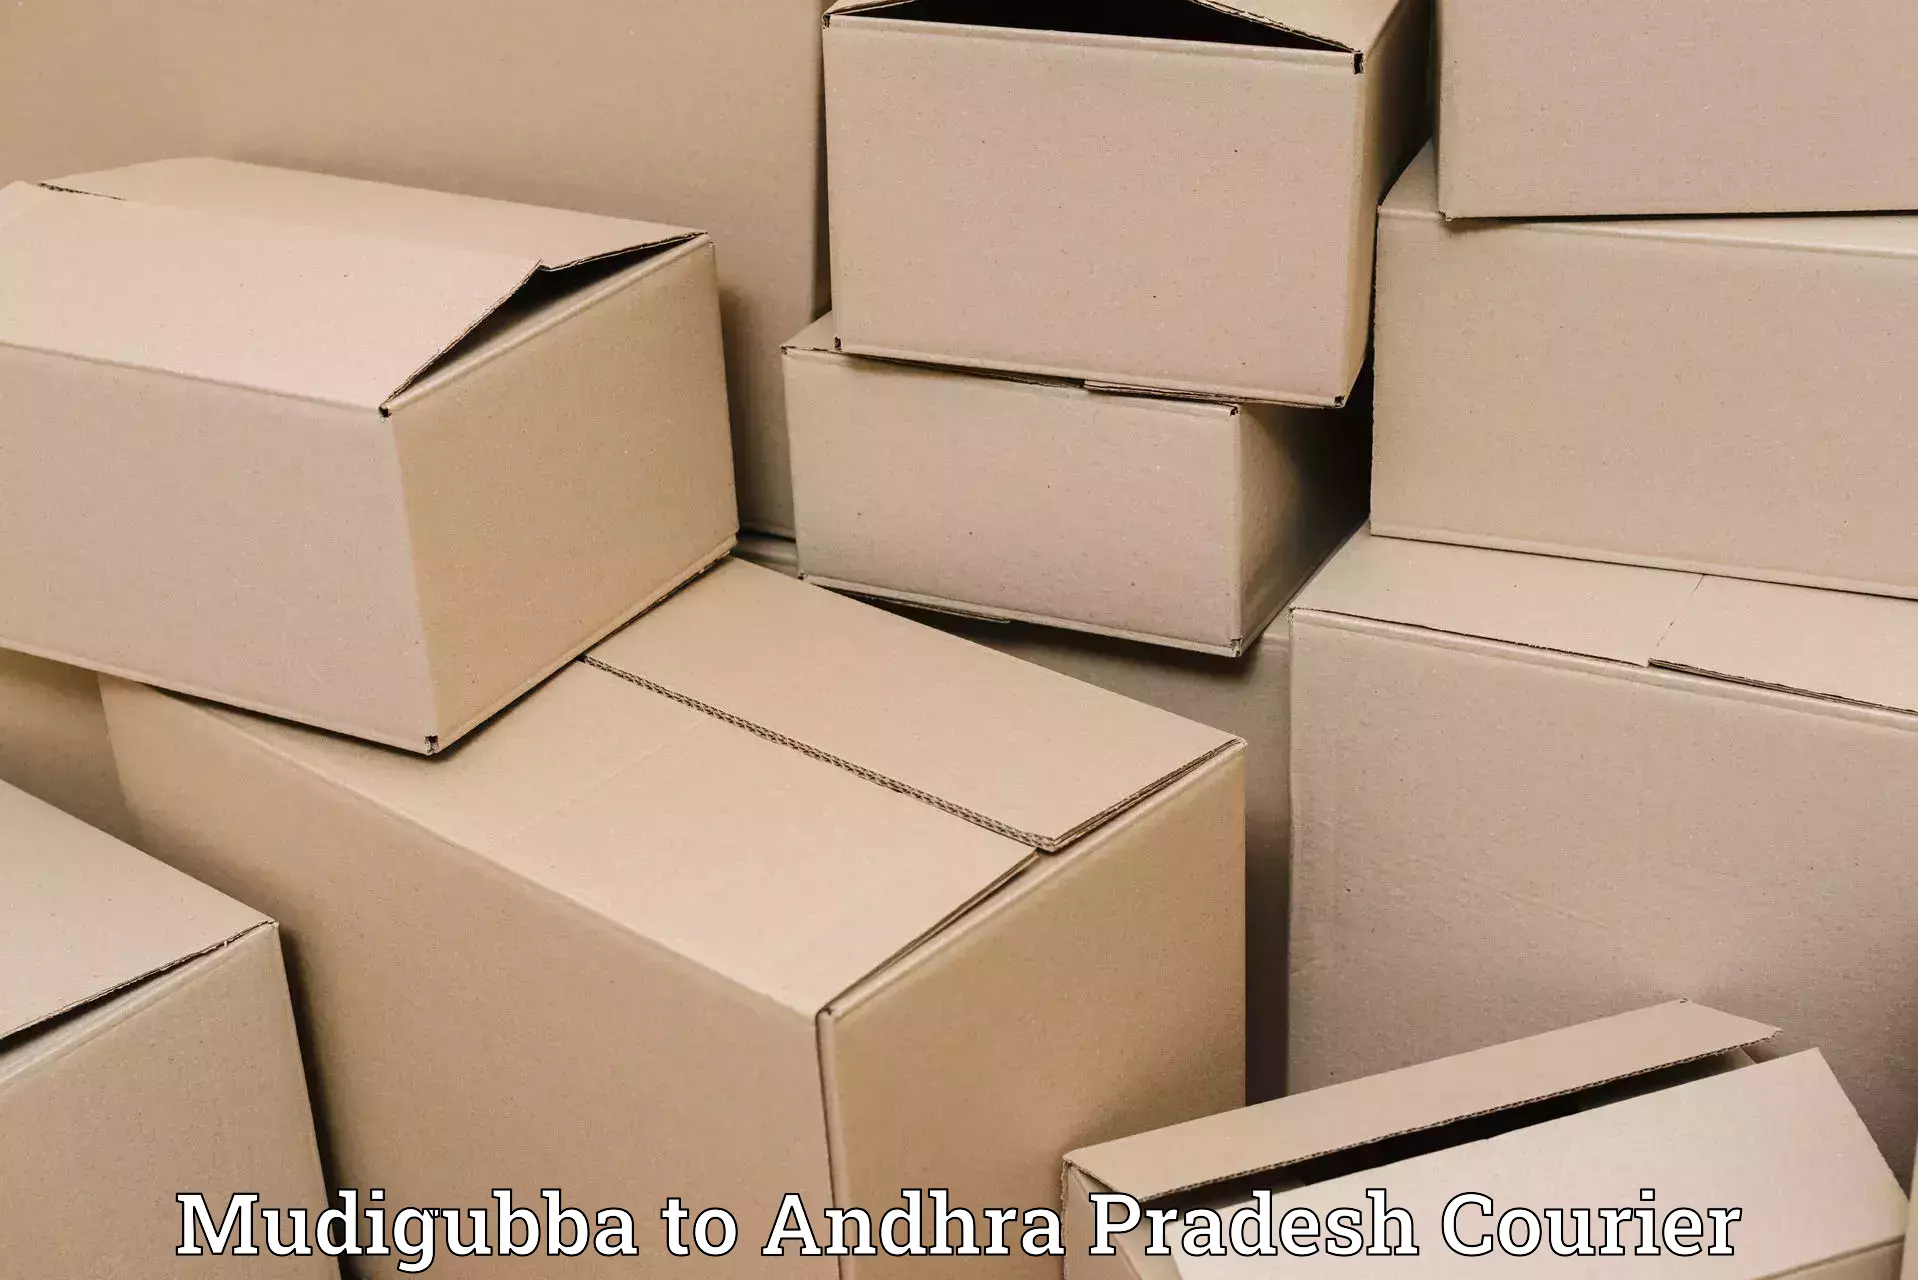 Overnight delivery services Mudigubba to Andhra Pradesh